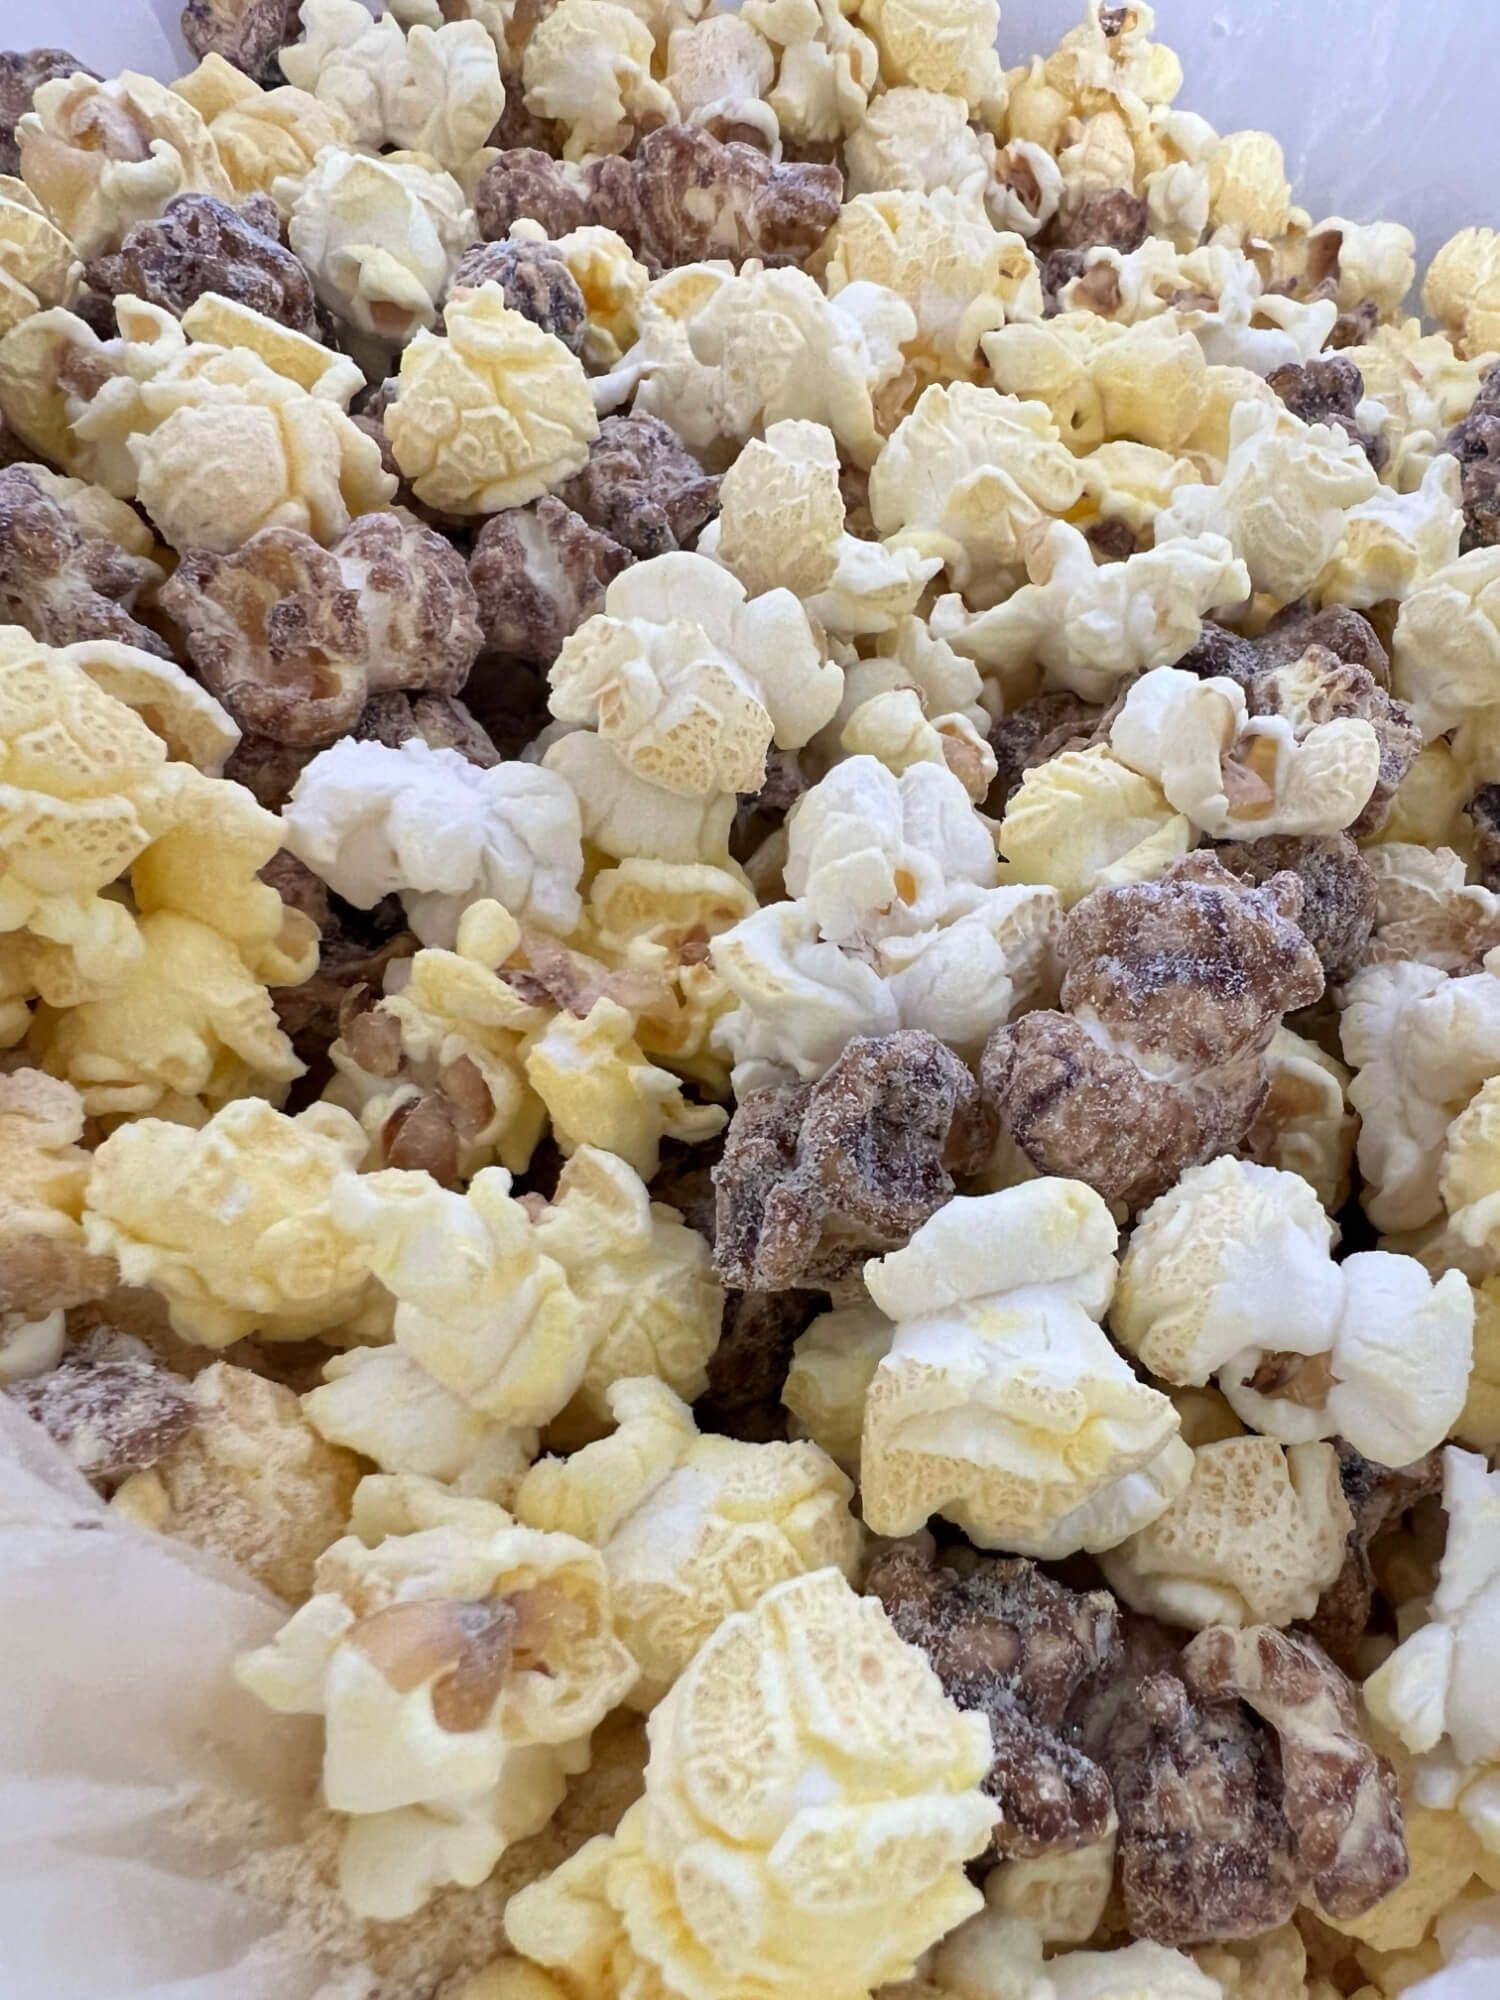 A close up of a pile of popcorn with different flavors on a table.